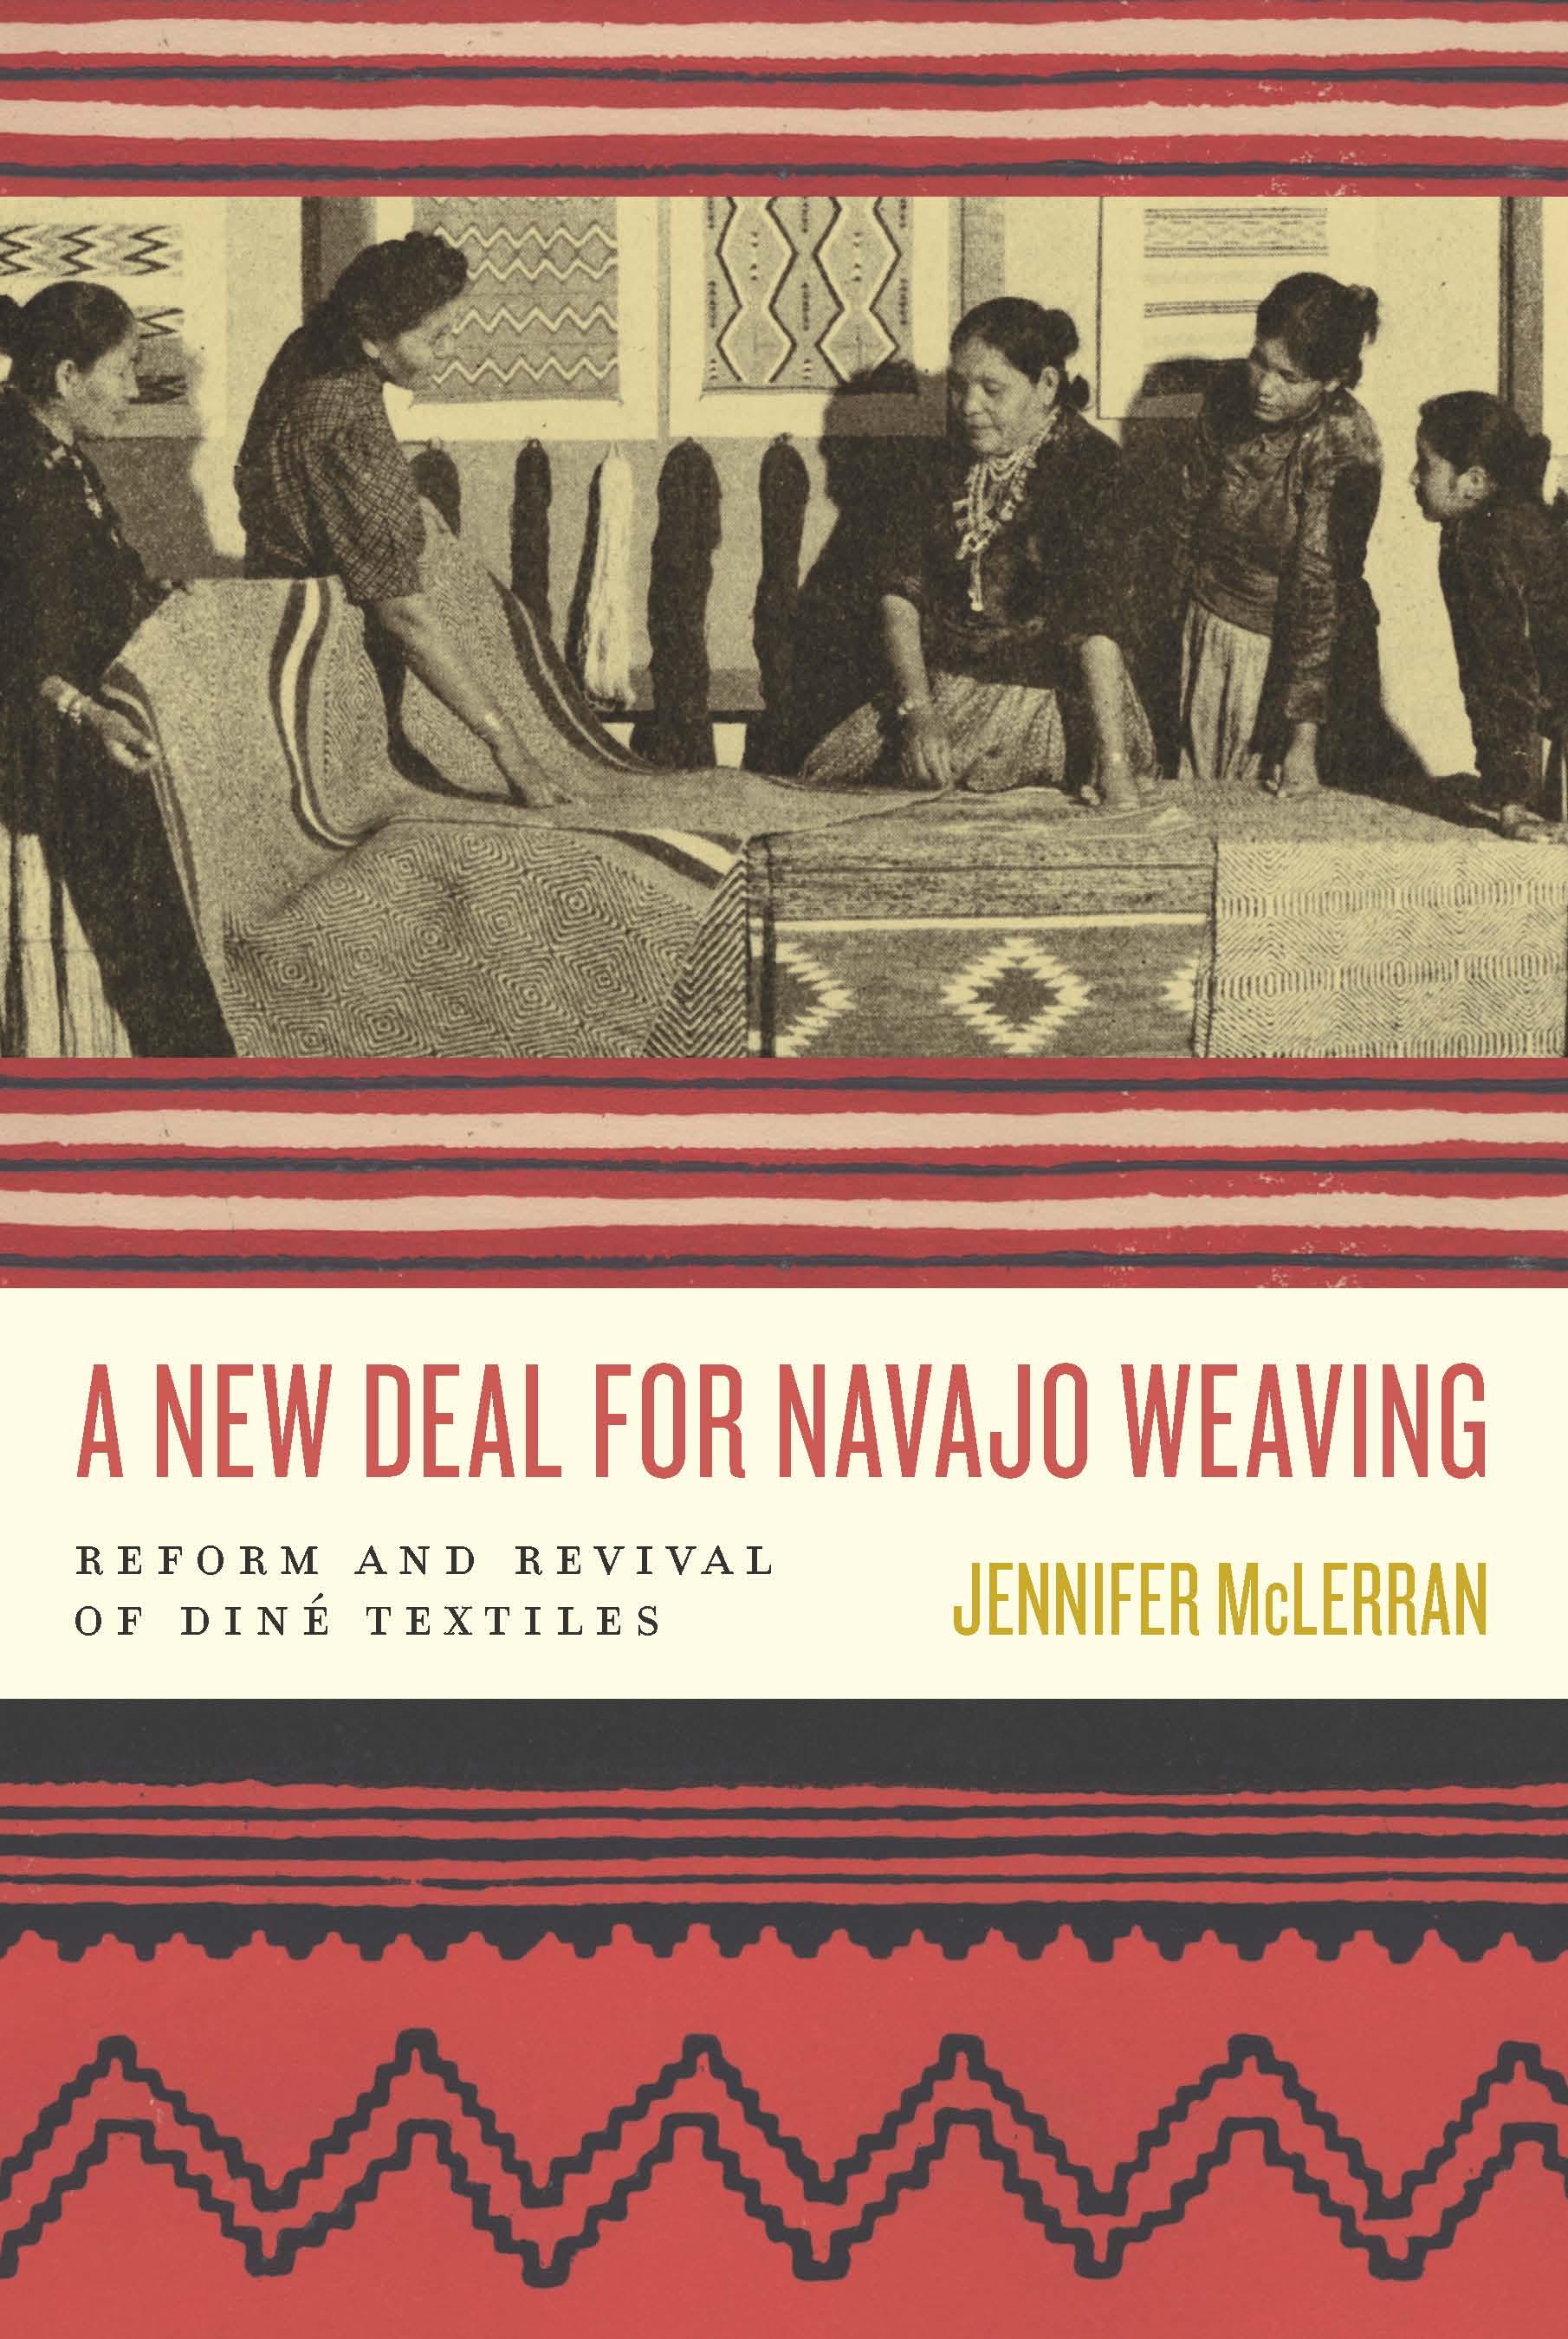 Link to A New Deal for Navajo Weaving : Reform and Revival of Diné Textiles by Jennifer McLerran in the catalog